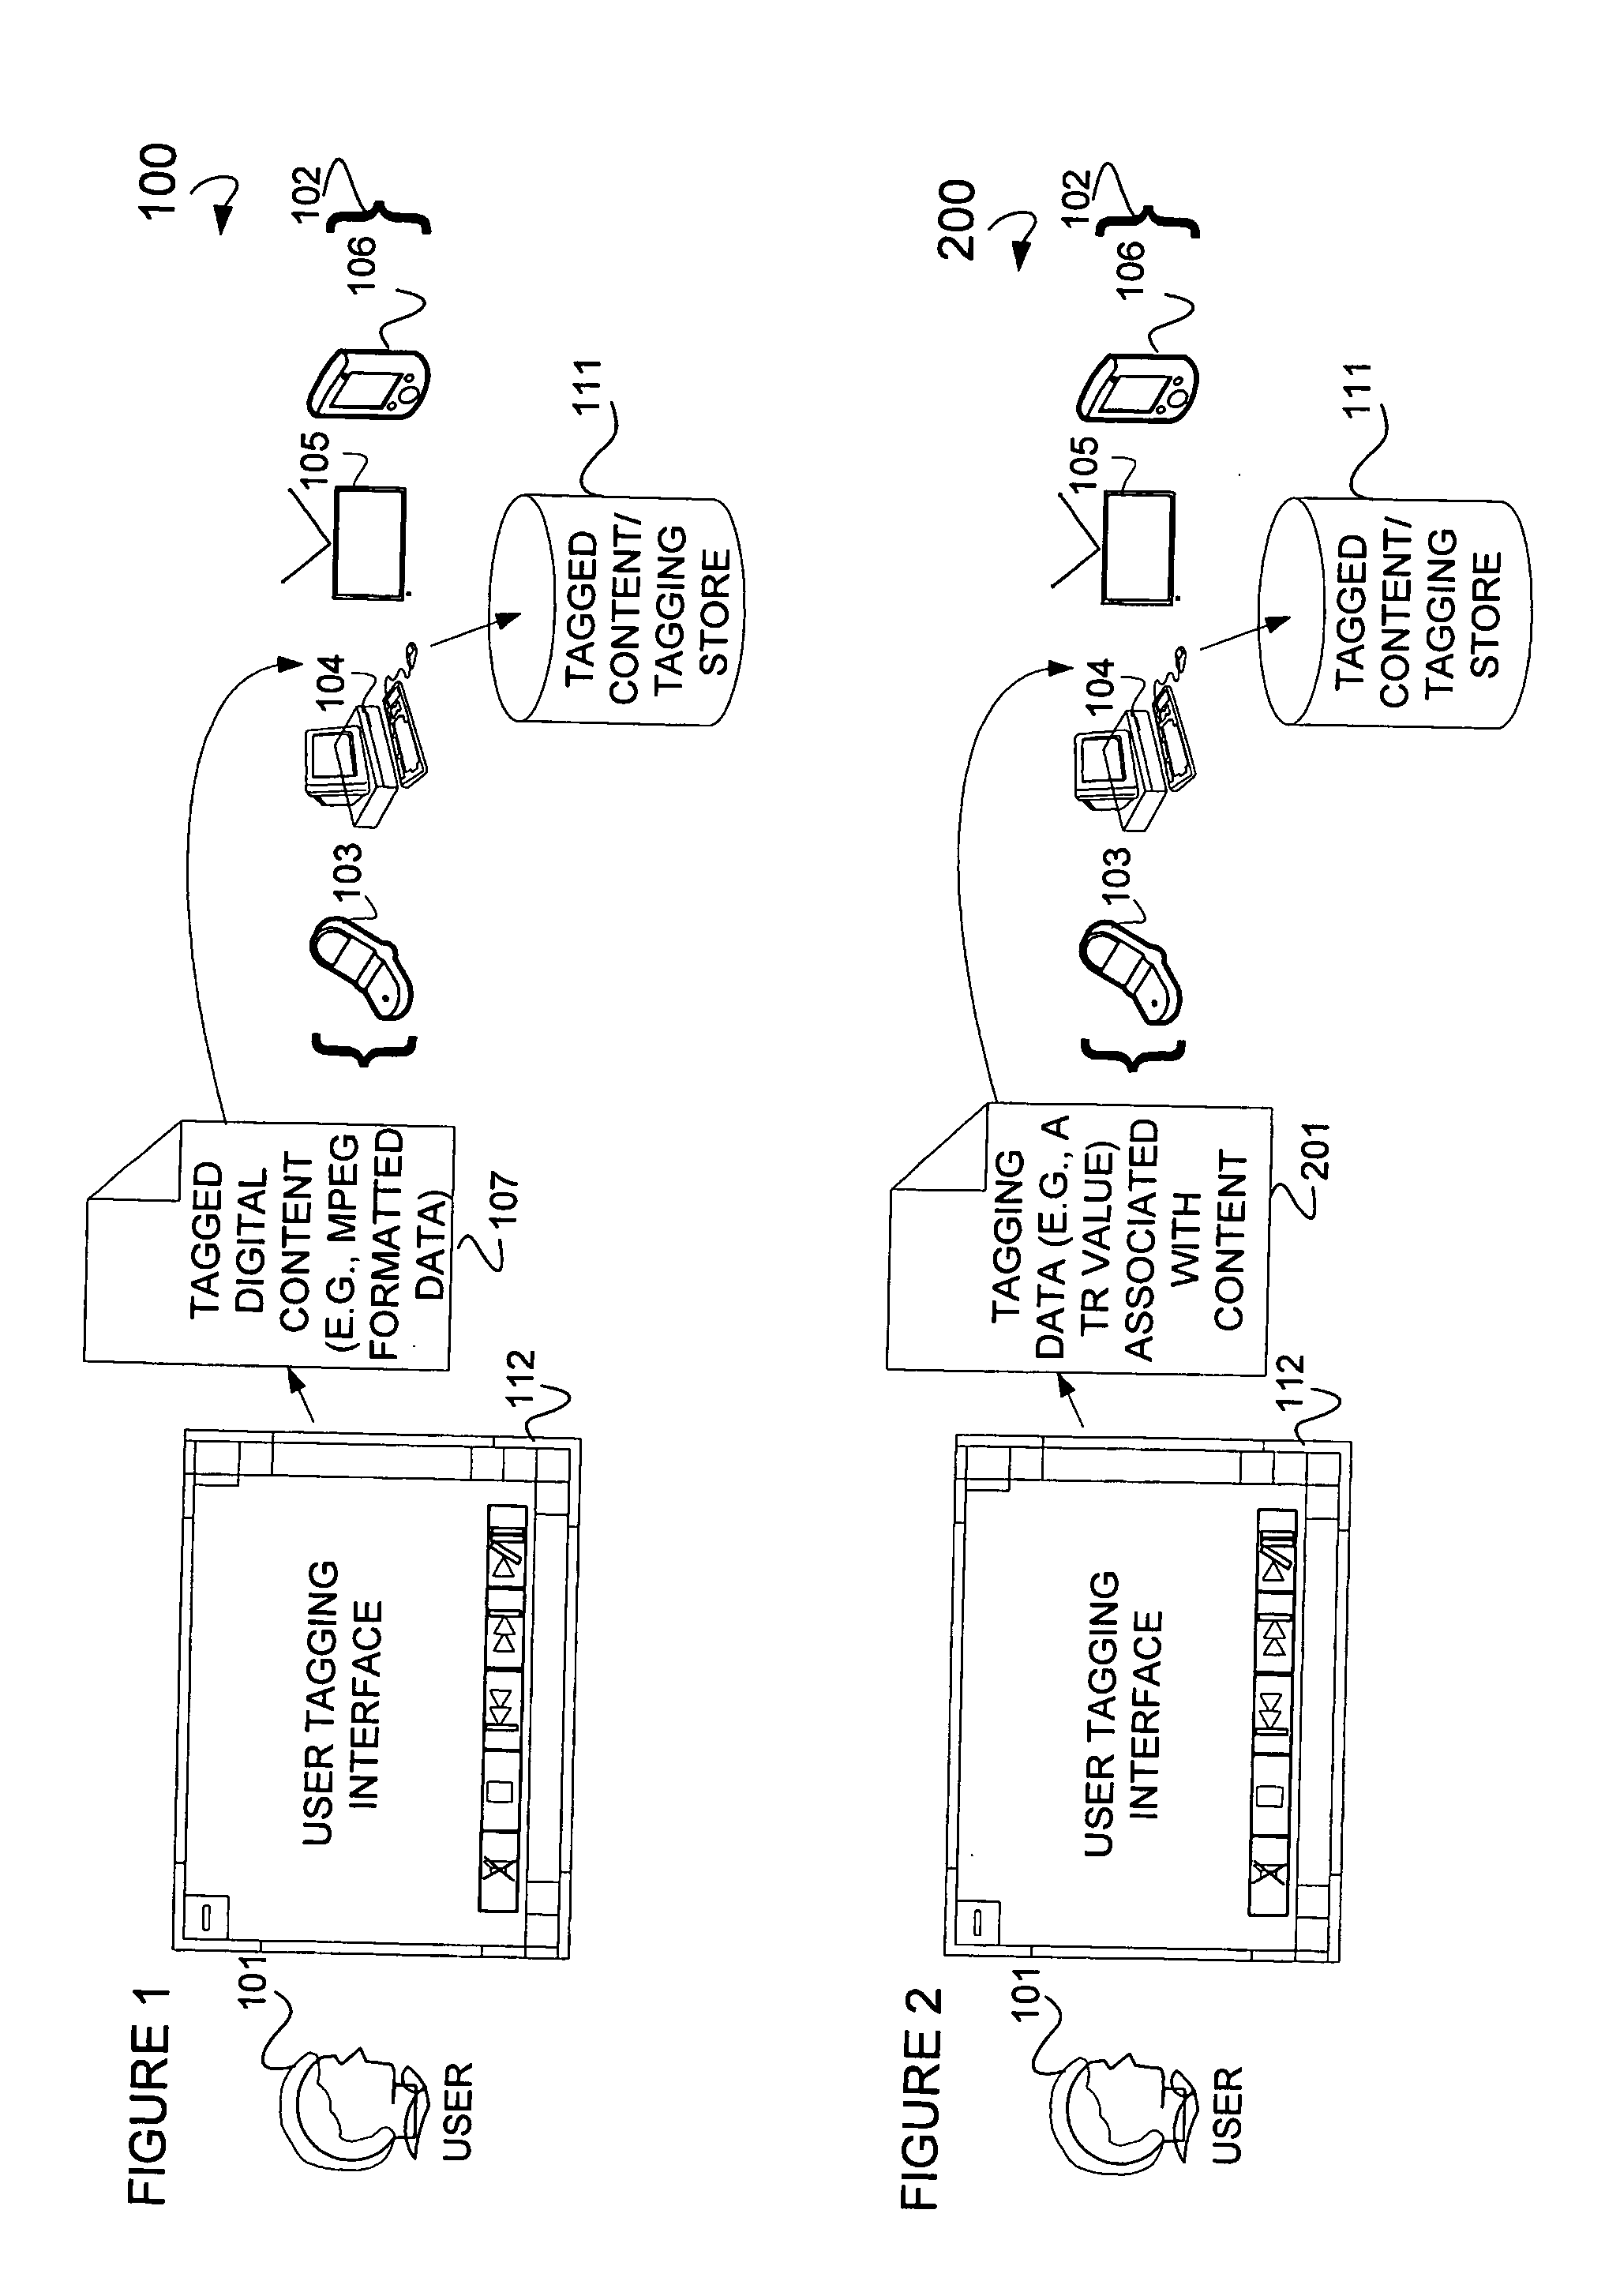 Audio/video content synchronization and display